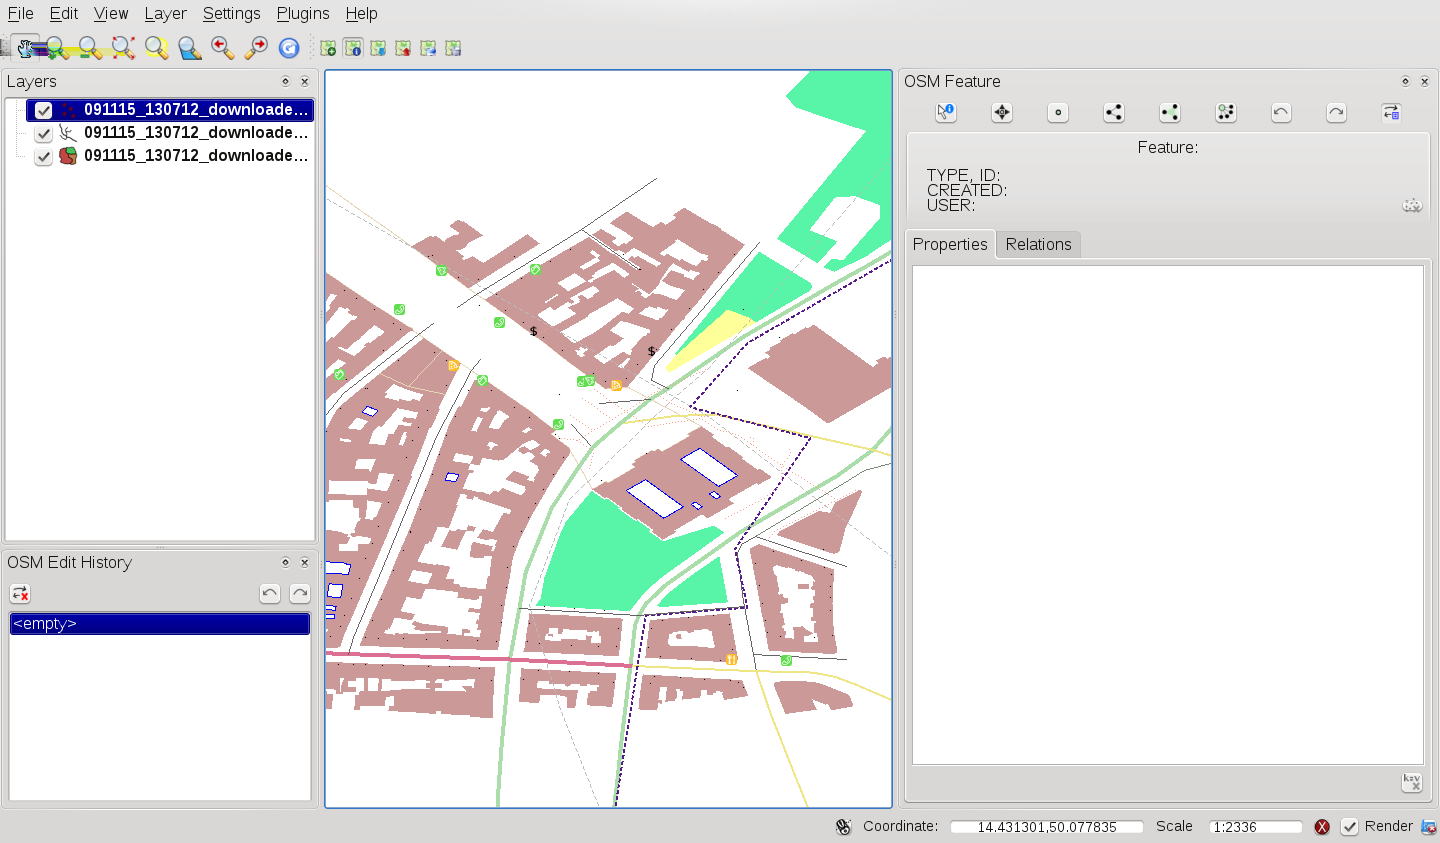 For this reason, the OSM plugin need its own tools for editing OSM data. While they are used, the OSM layers can be changed correctly.